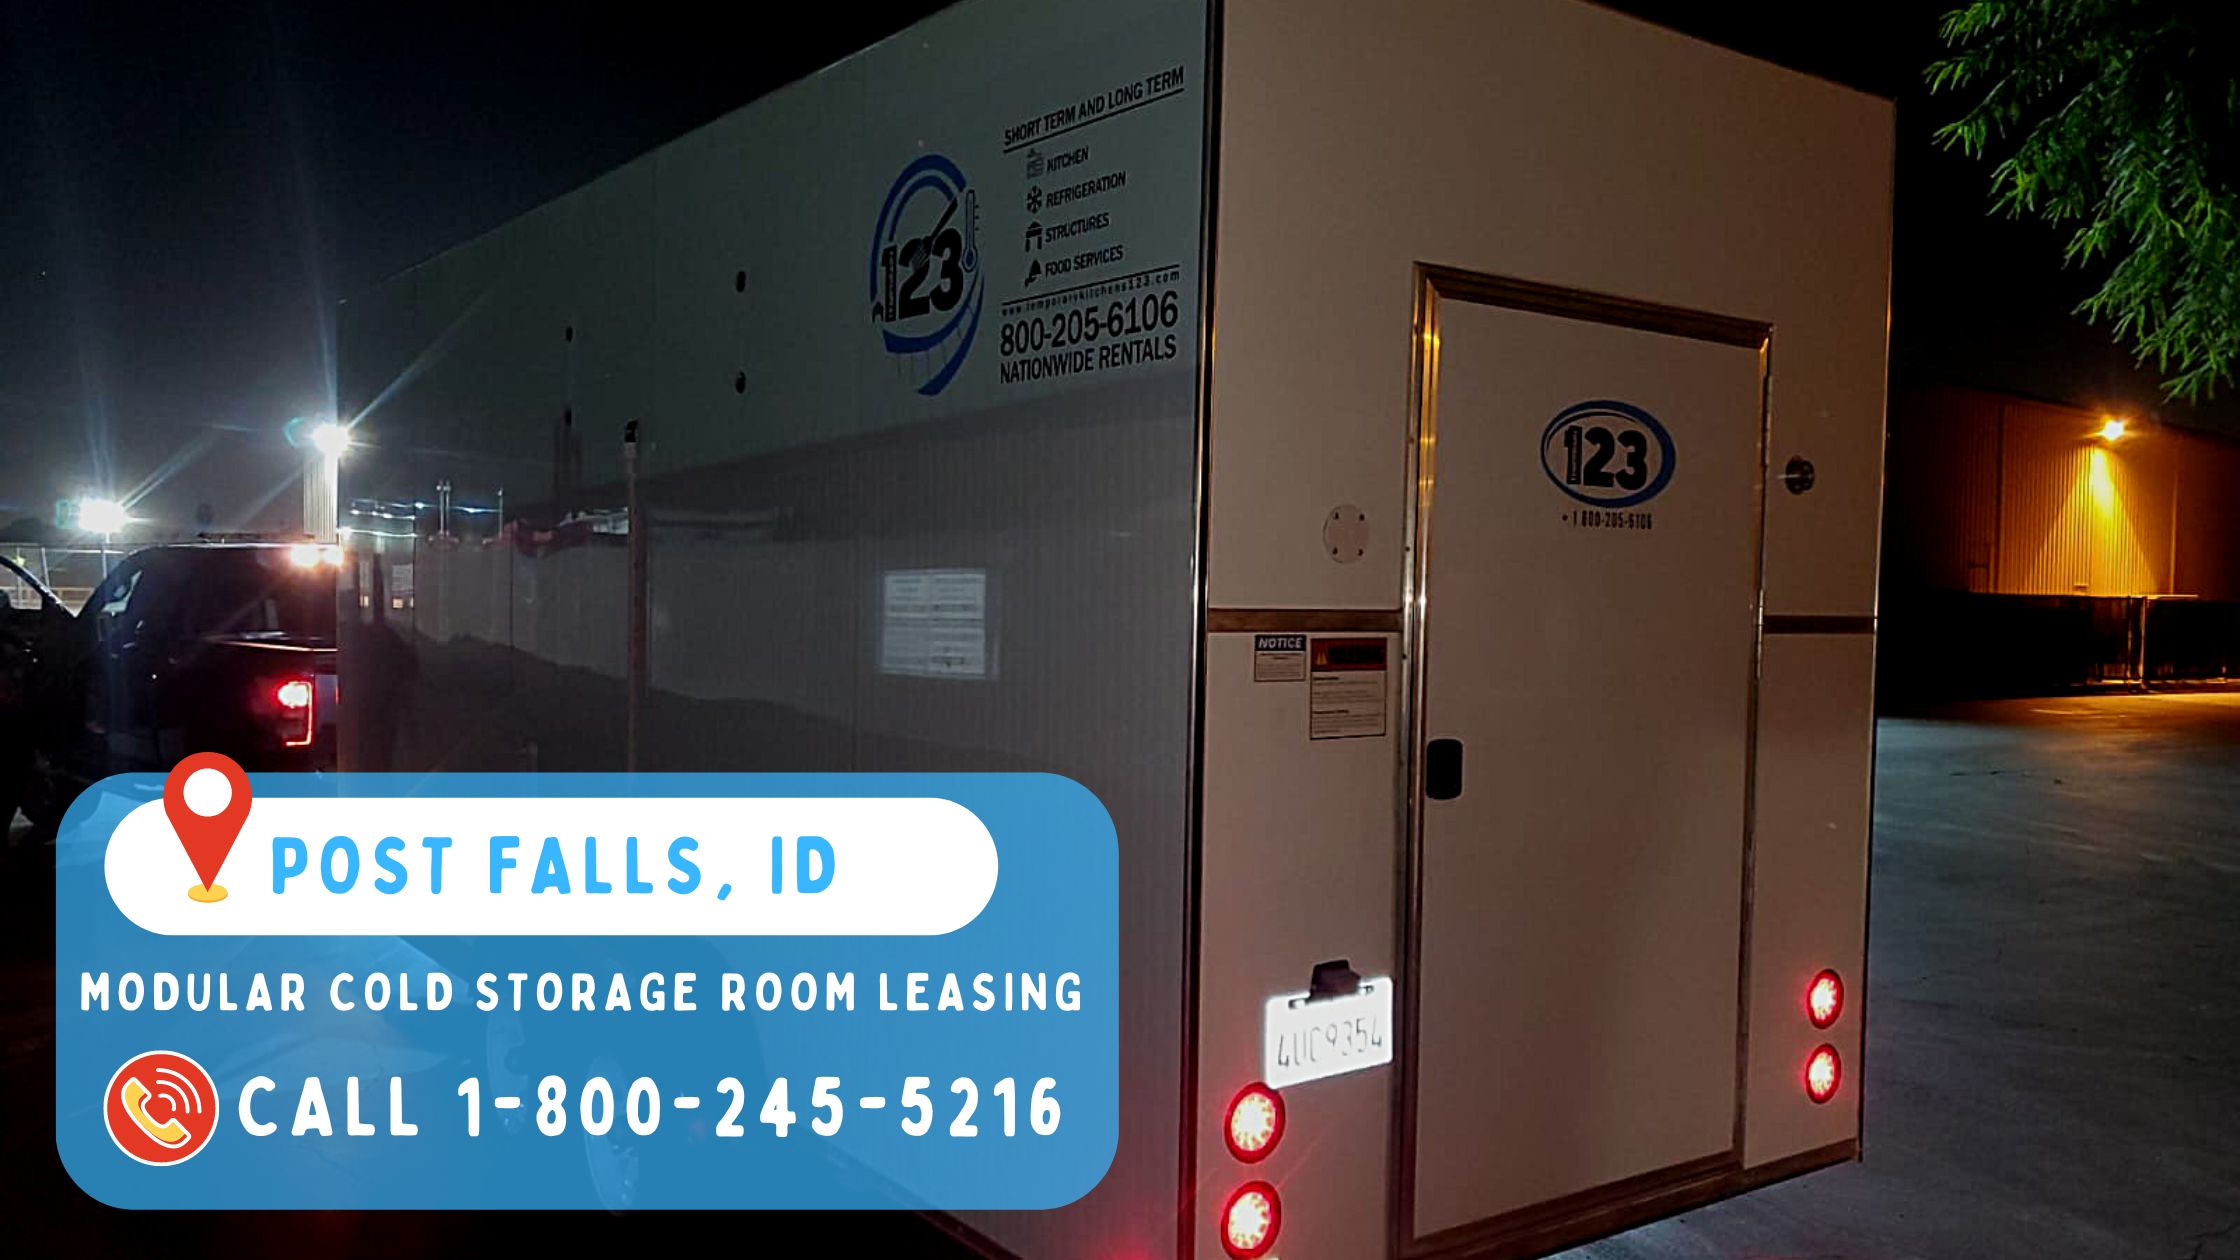 Modular Cold Storage Room Leasing in Post Falls, ID